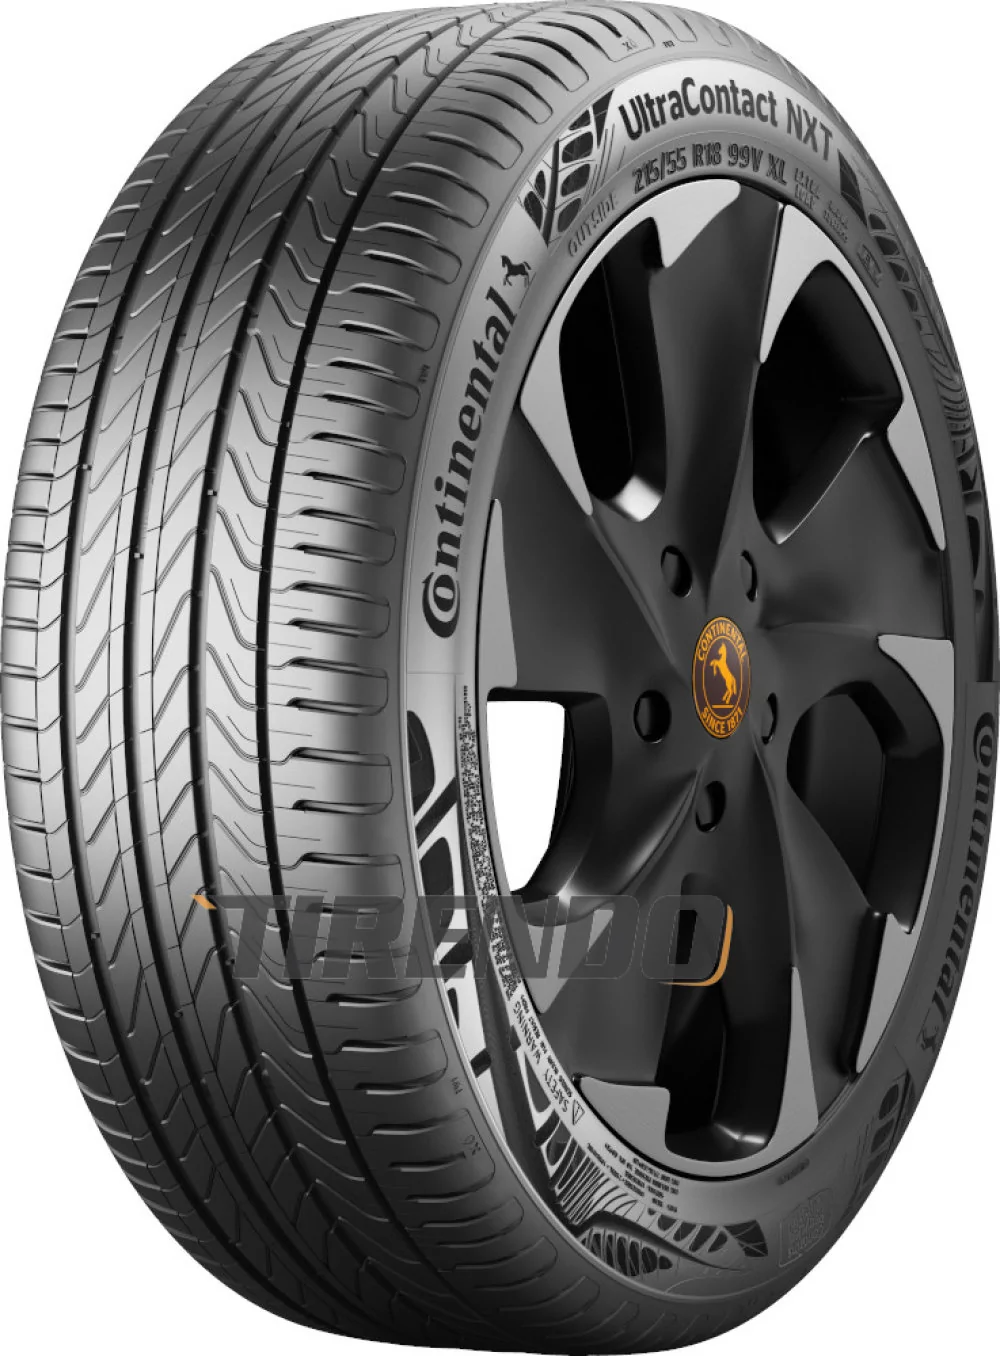 Continental UltraContact NXT - ContiRe.Tex 225/55R17 101W